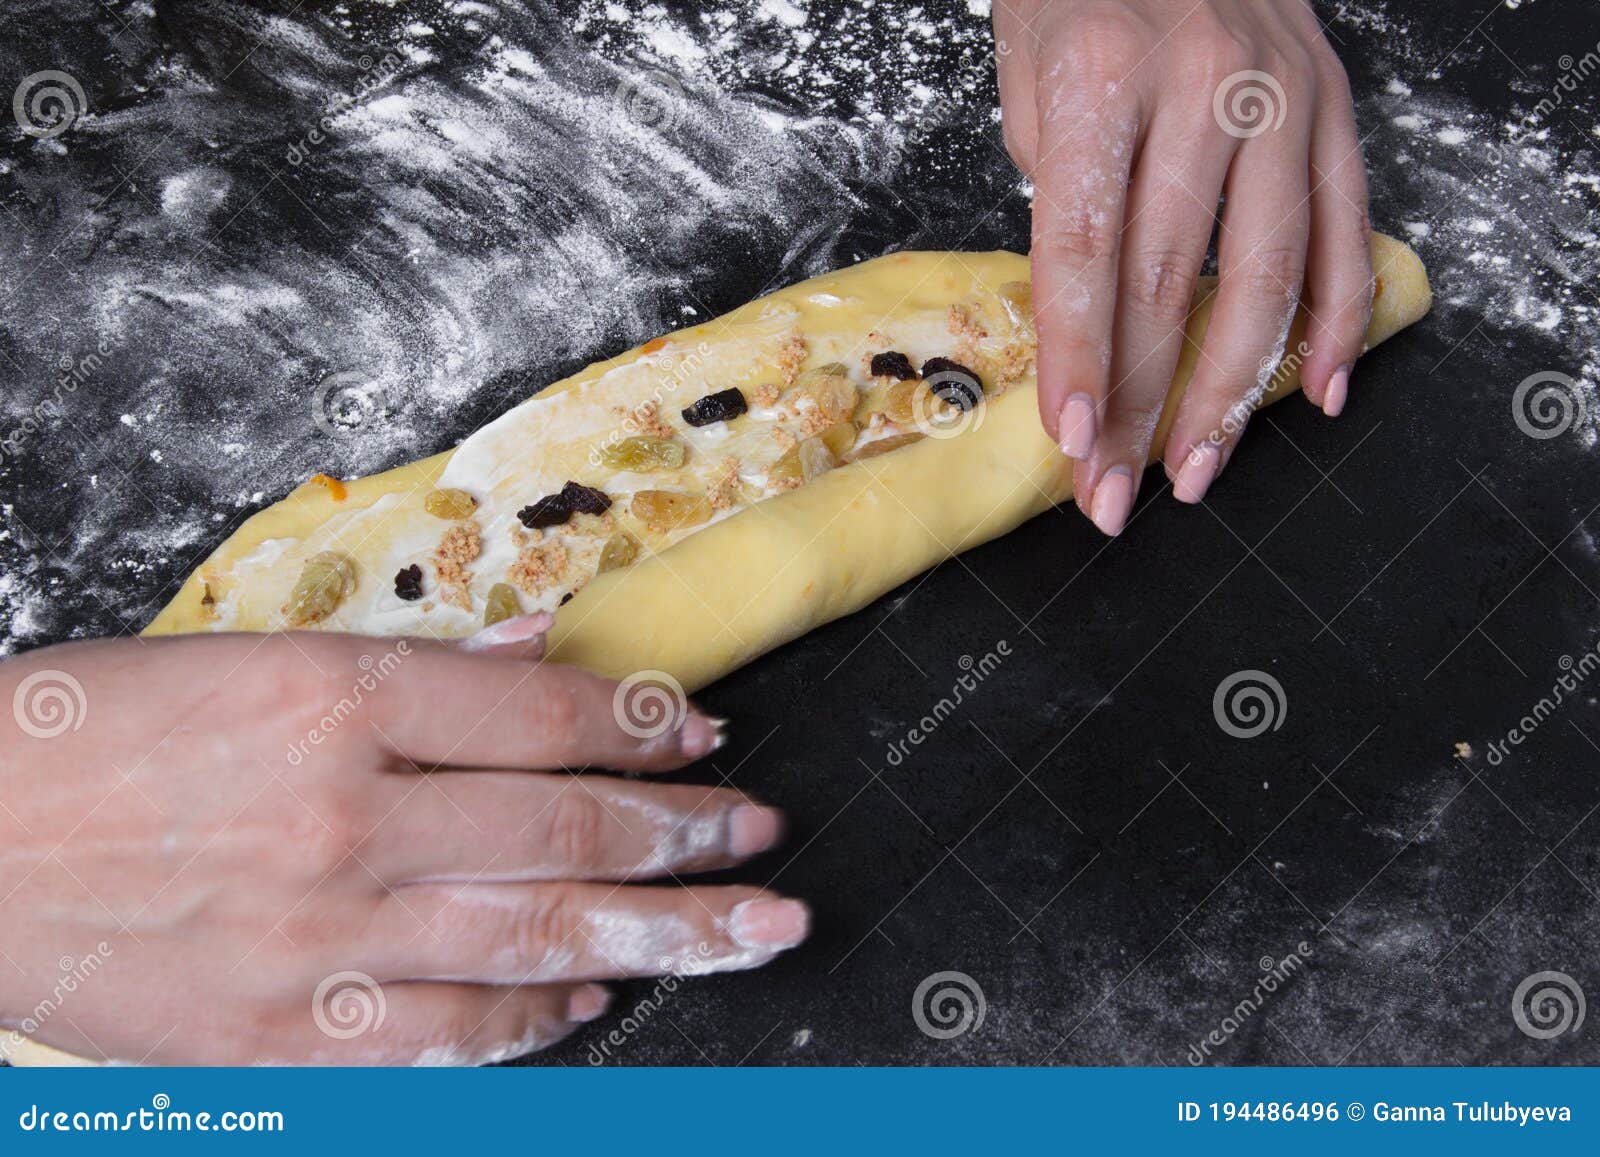 woman make dough for sweet homemade backery on black background